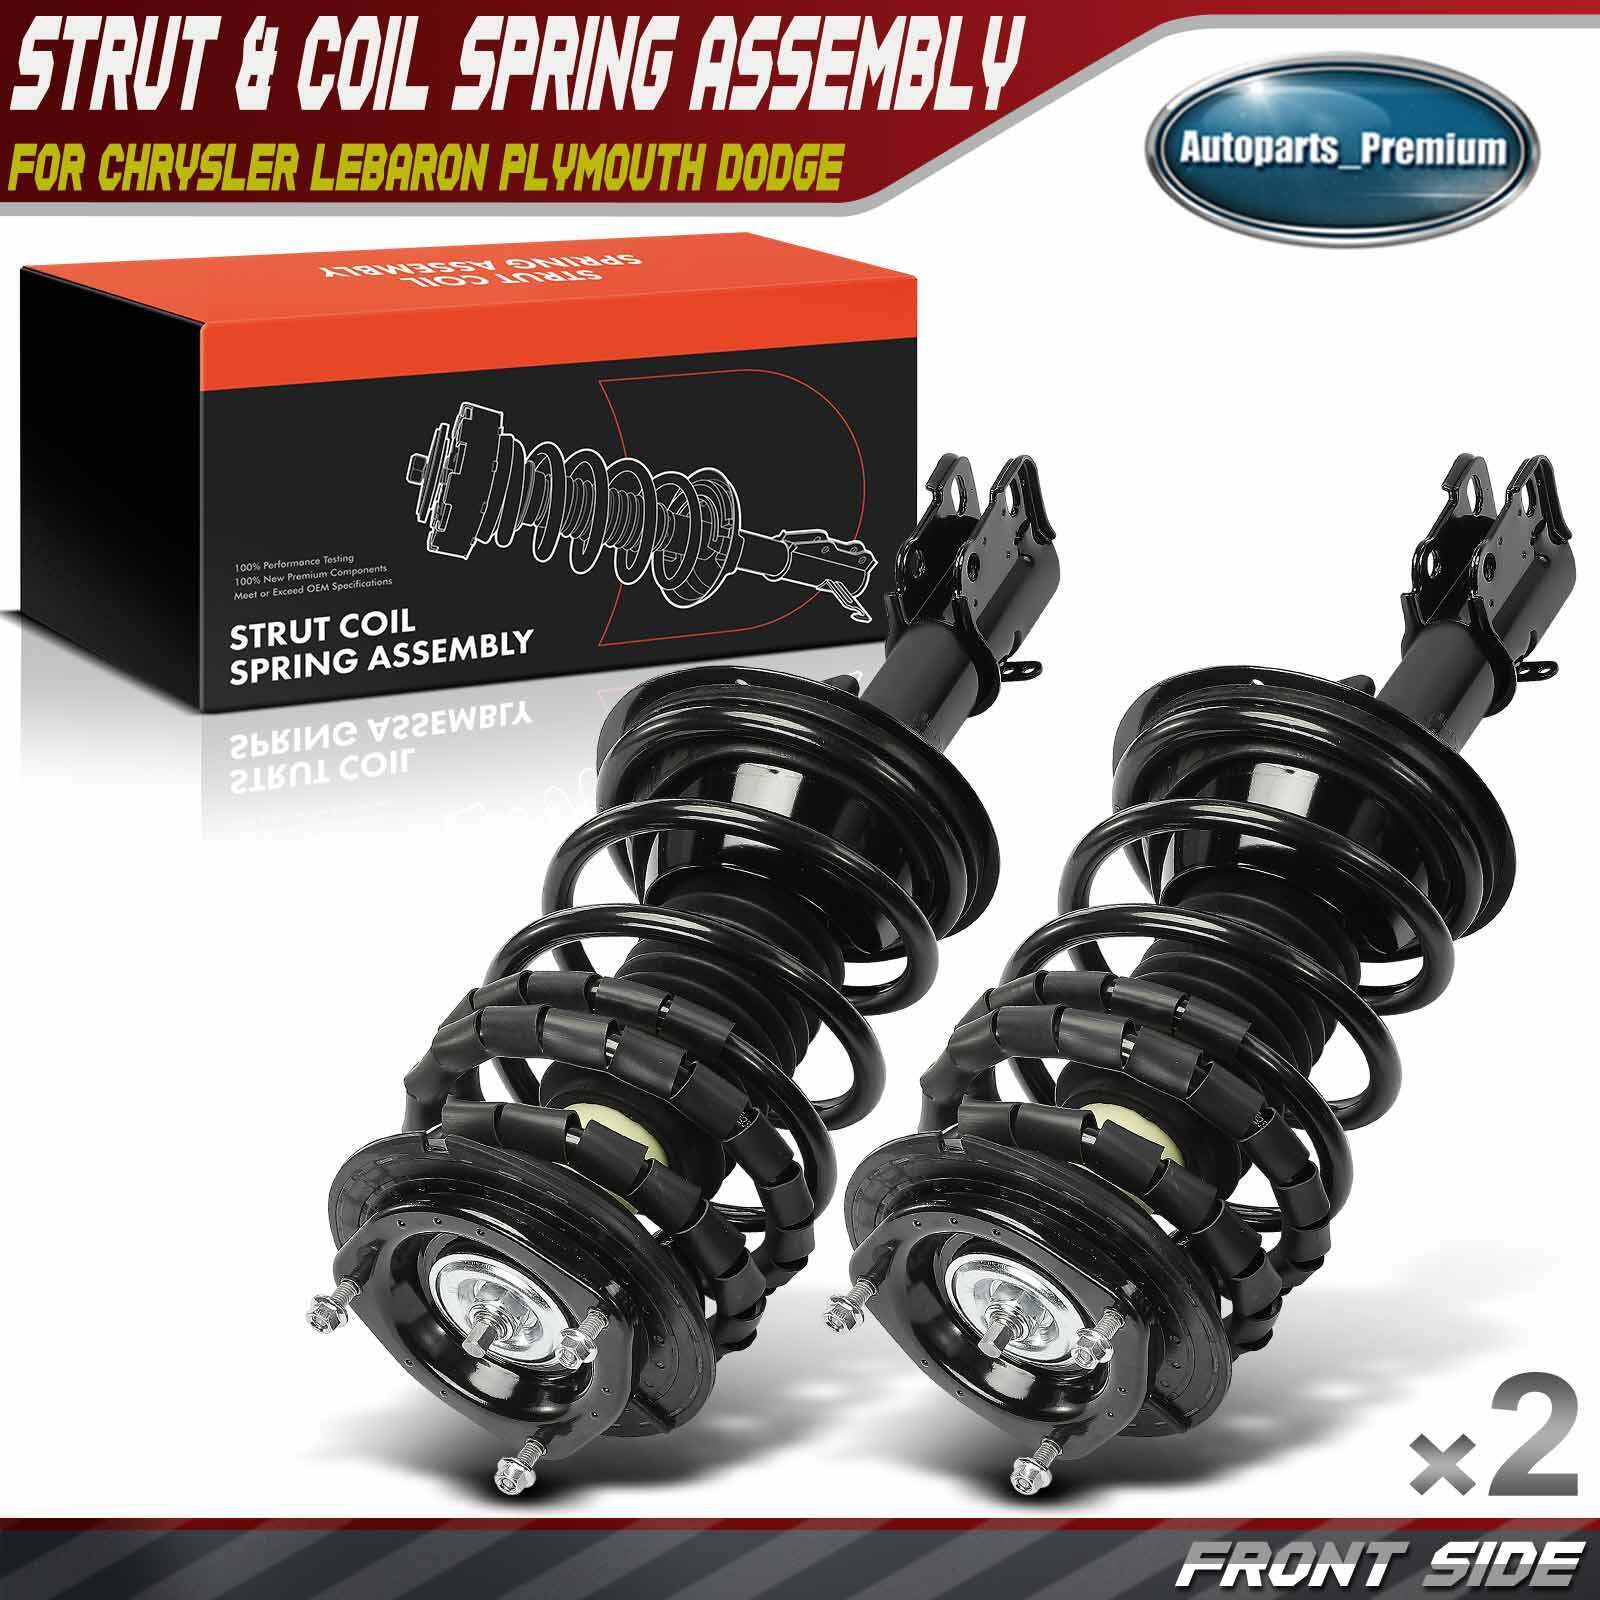 Front Complete Strut & Coil Spring Assembly for Chrysler Lebaron Plymouth Dodge